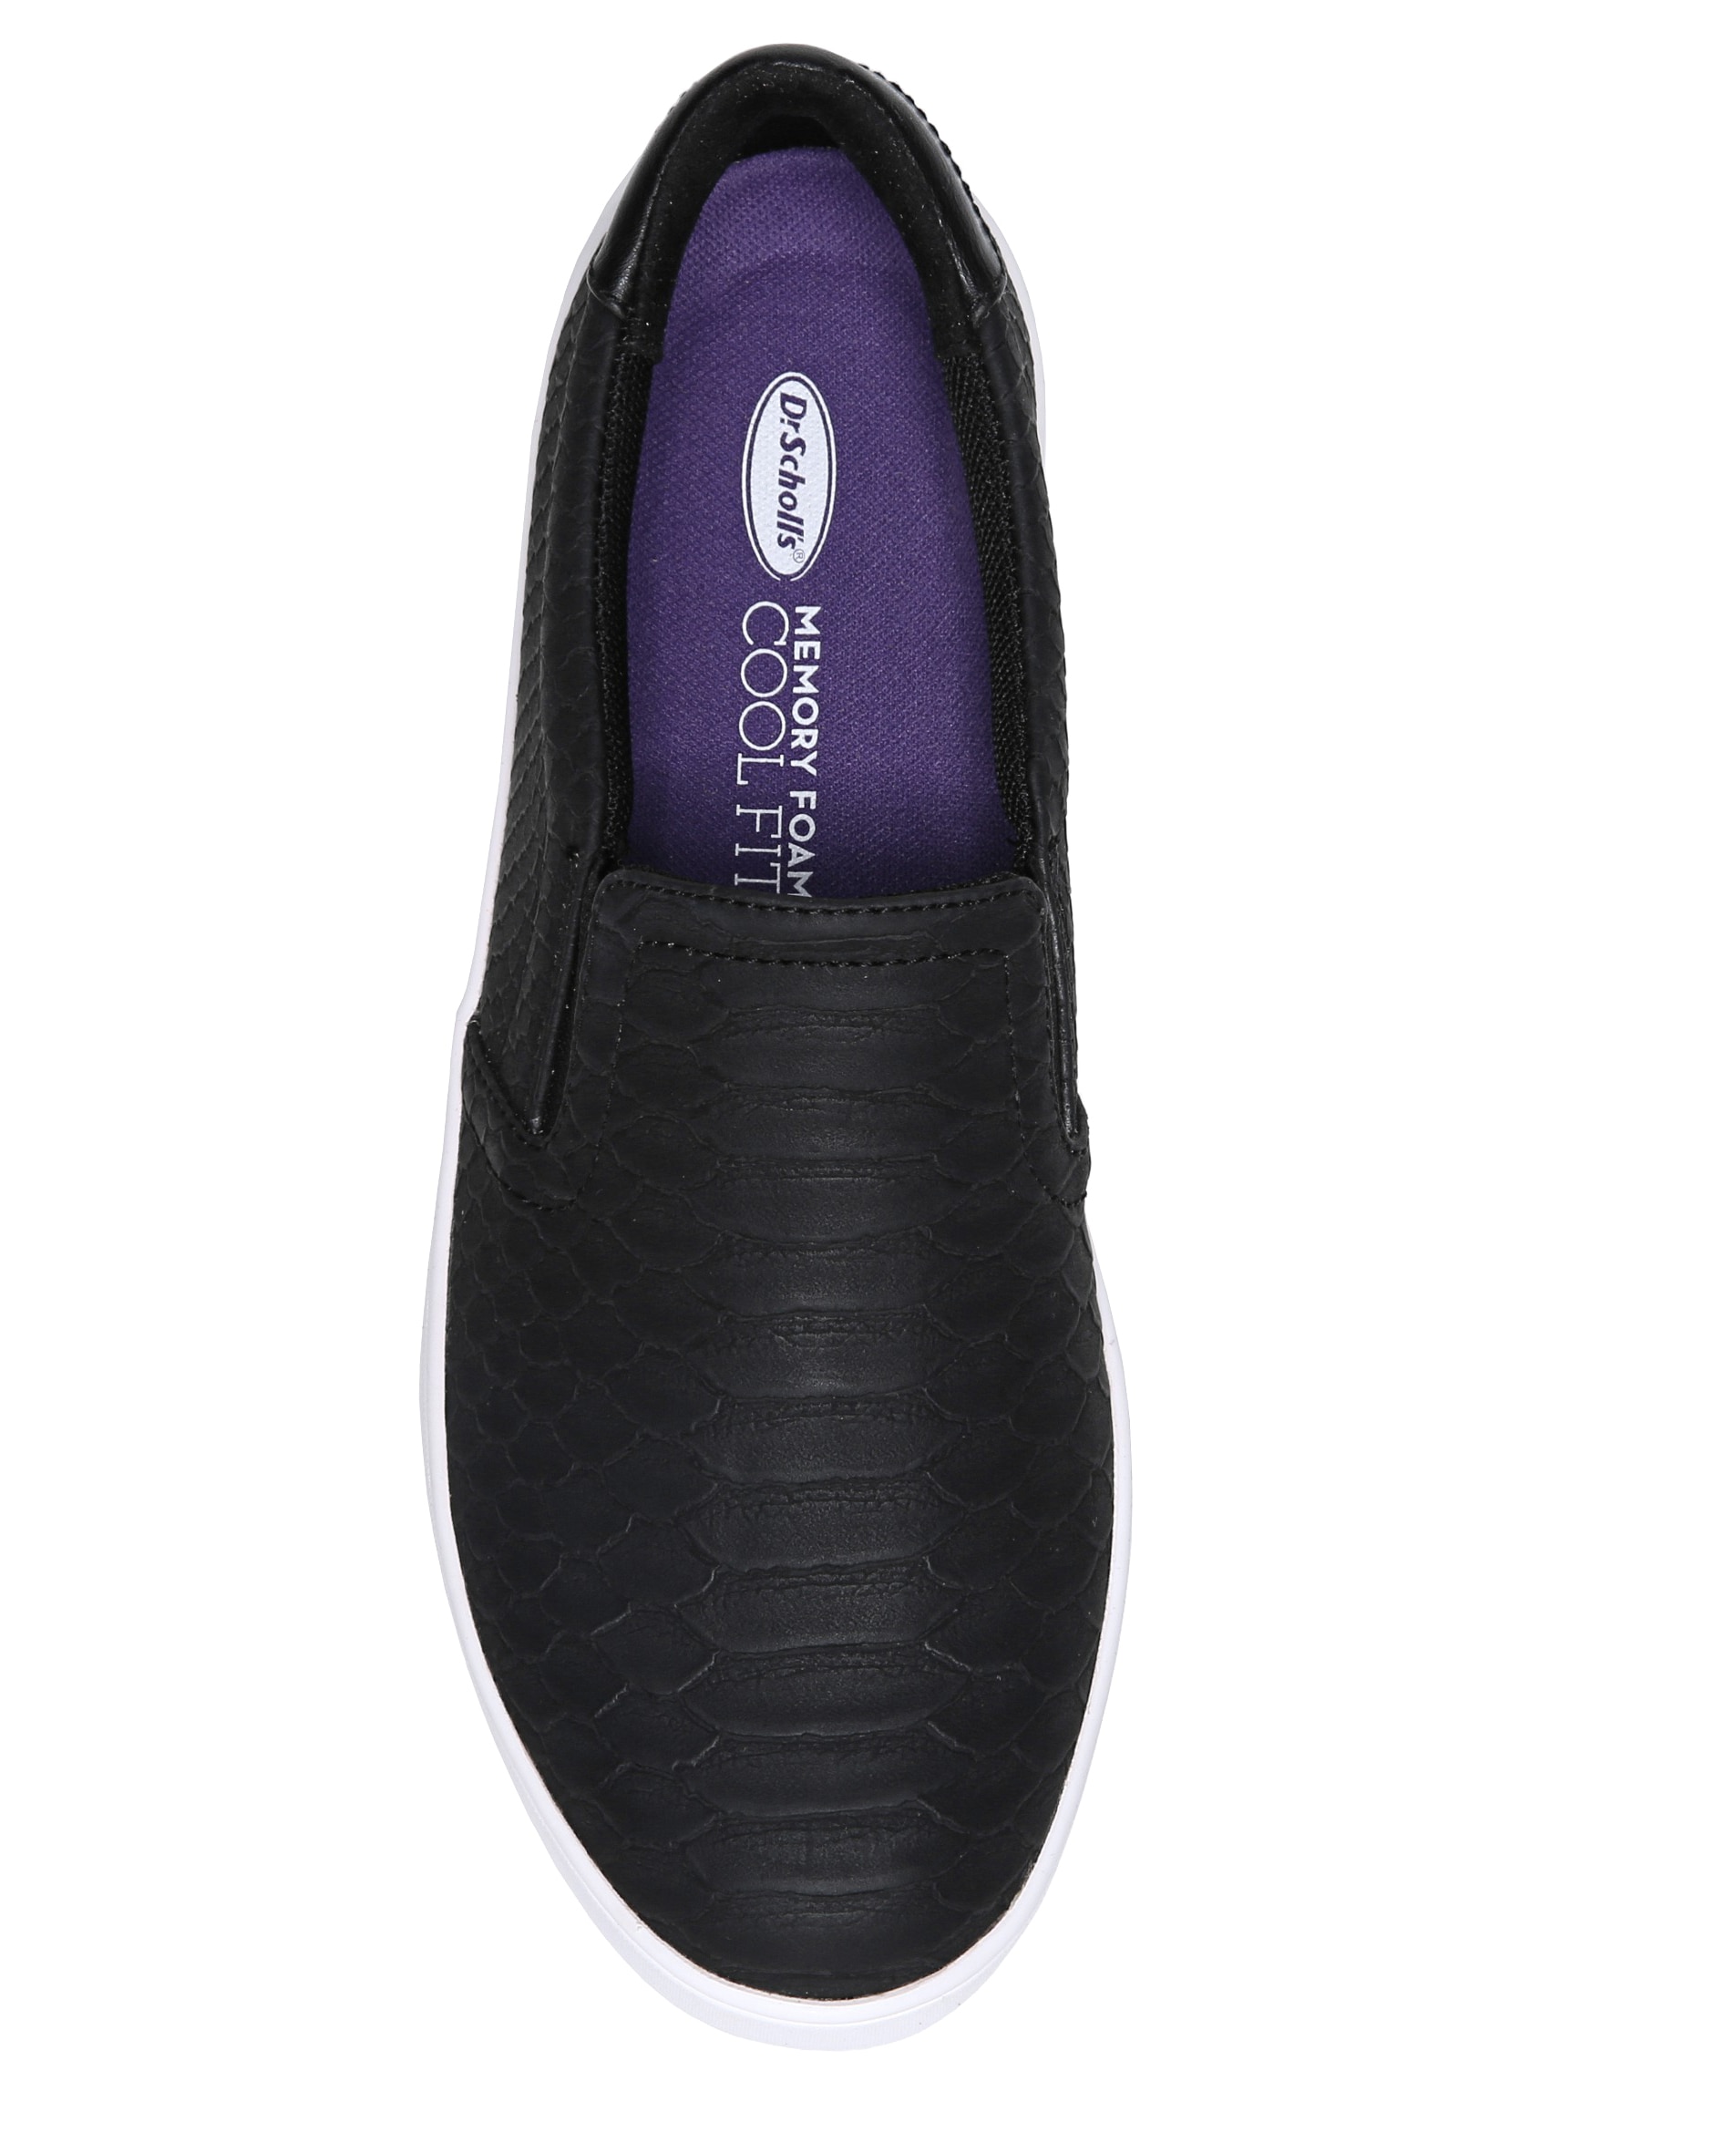 dr scholl's memory foam cool fit madison